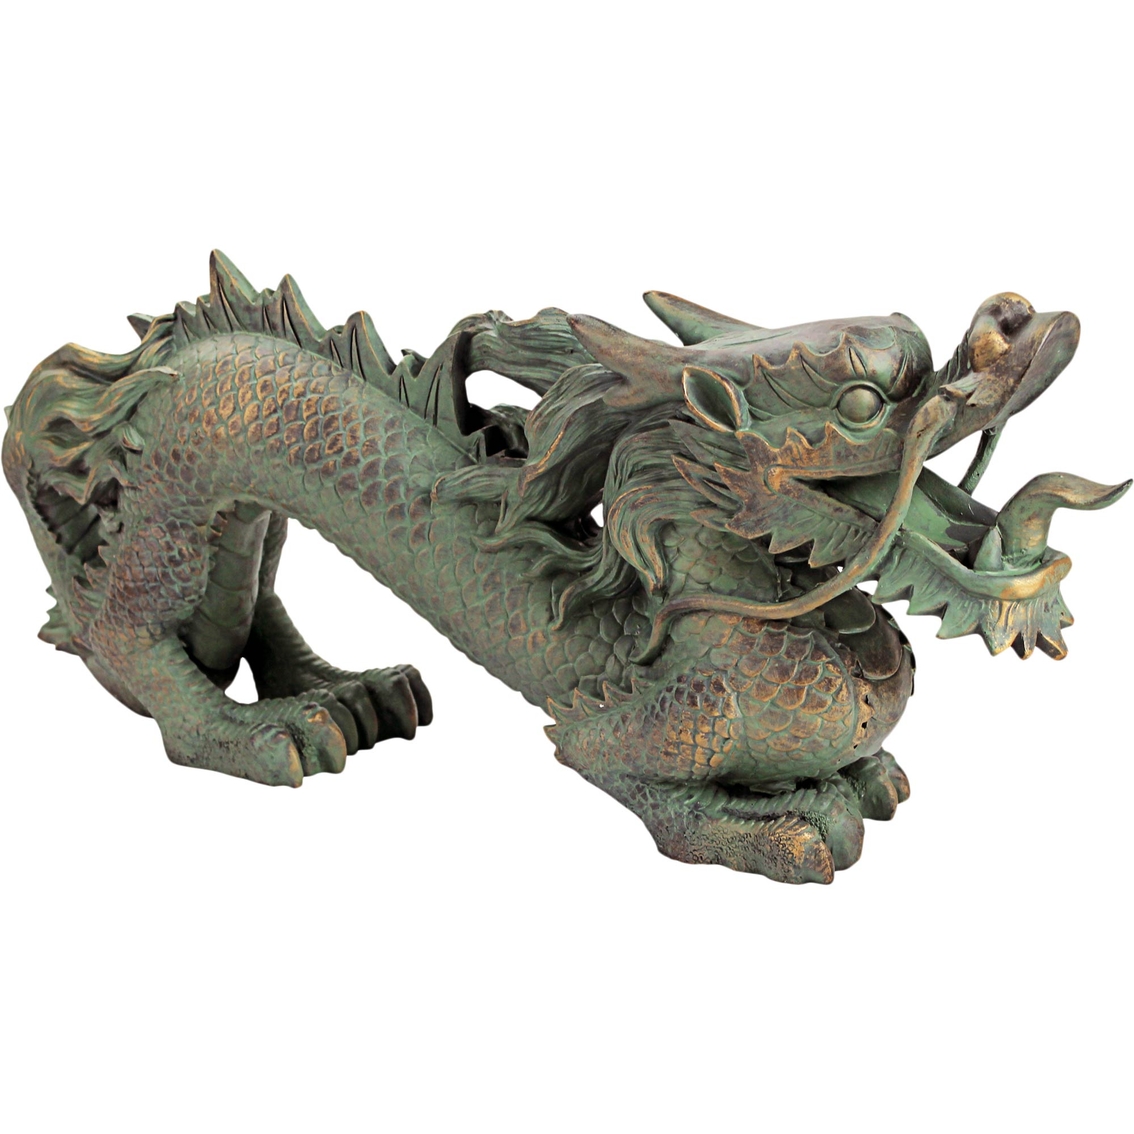 Design Toscano Great Wall Asian Dragon - Image 2 of 4